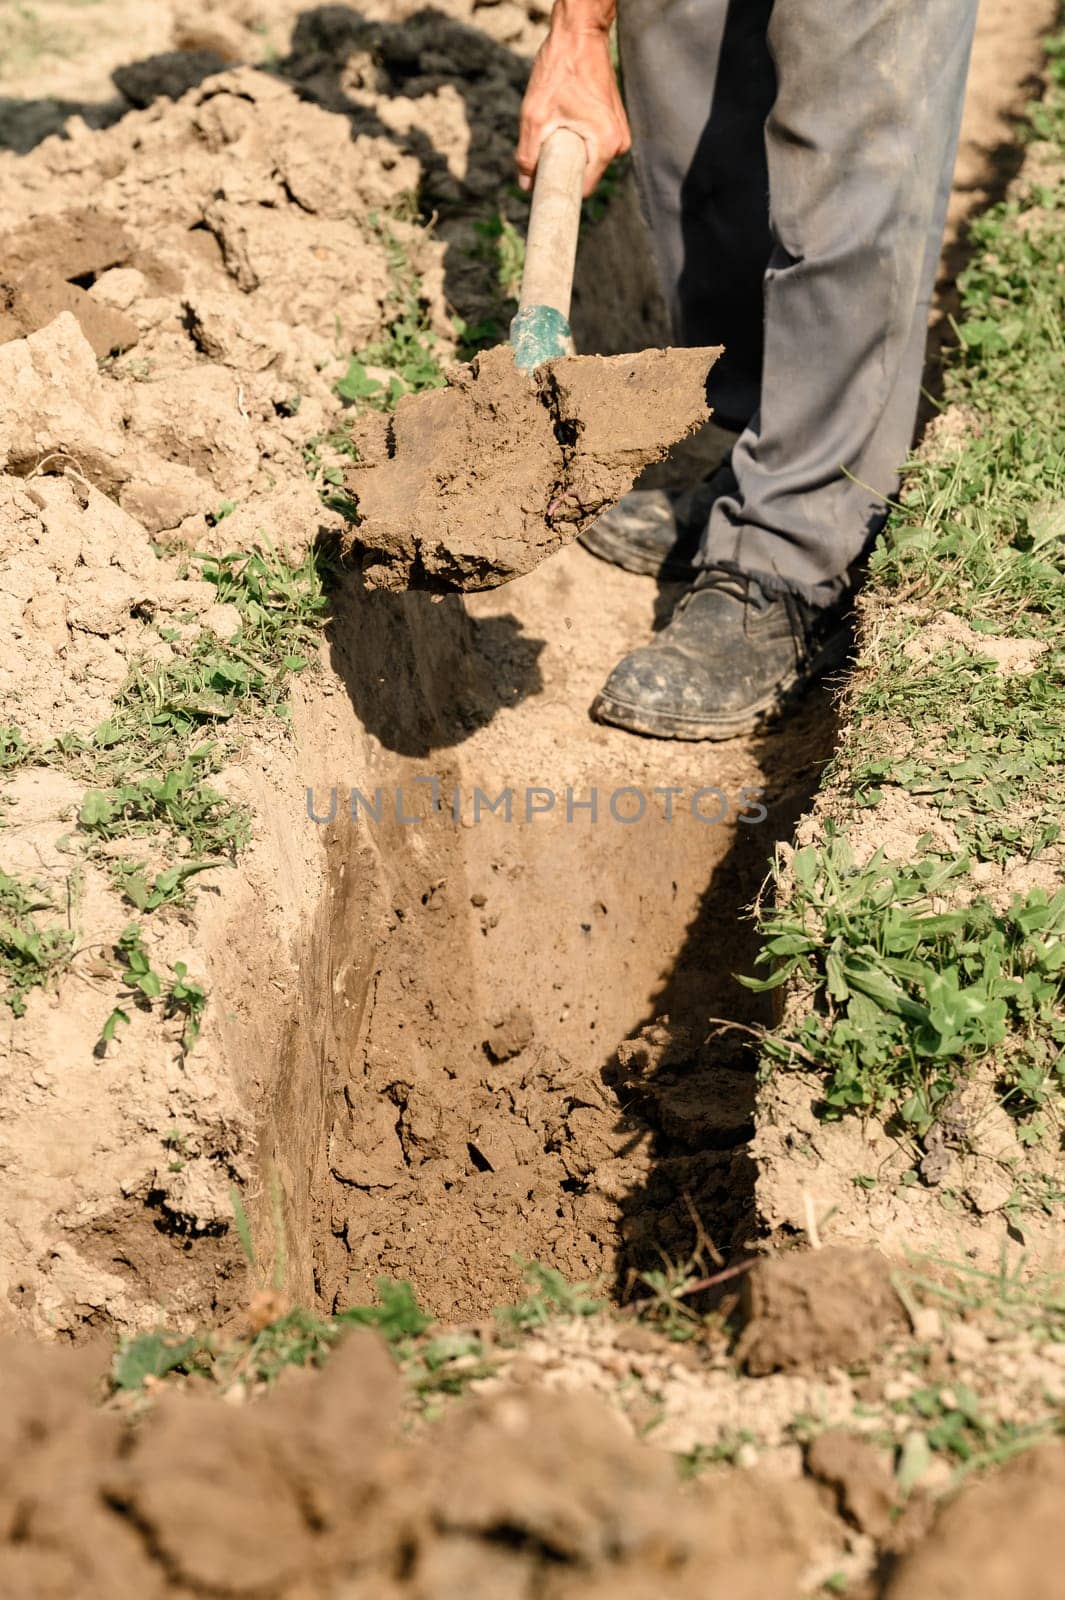 A man shovels a trench for drainage and sewage. by Niko_Cingaryuk